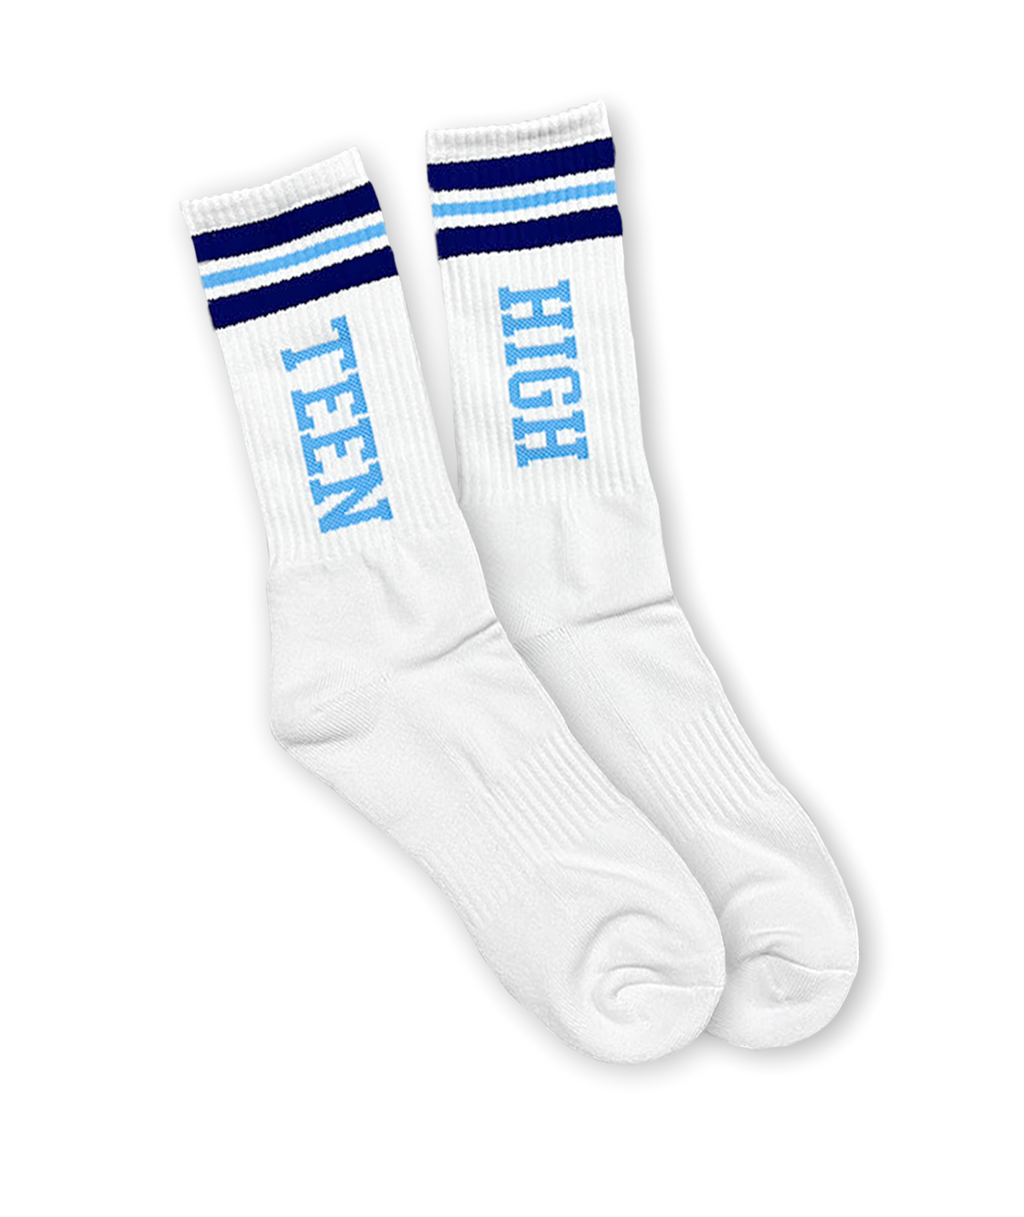 White gym socks with dark blue and light blue stripes at the top. One sock has the word TEEN down the side in light blue and the other socks has the word HIGH down the side in light blue.